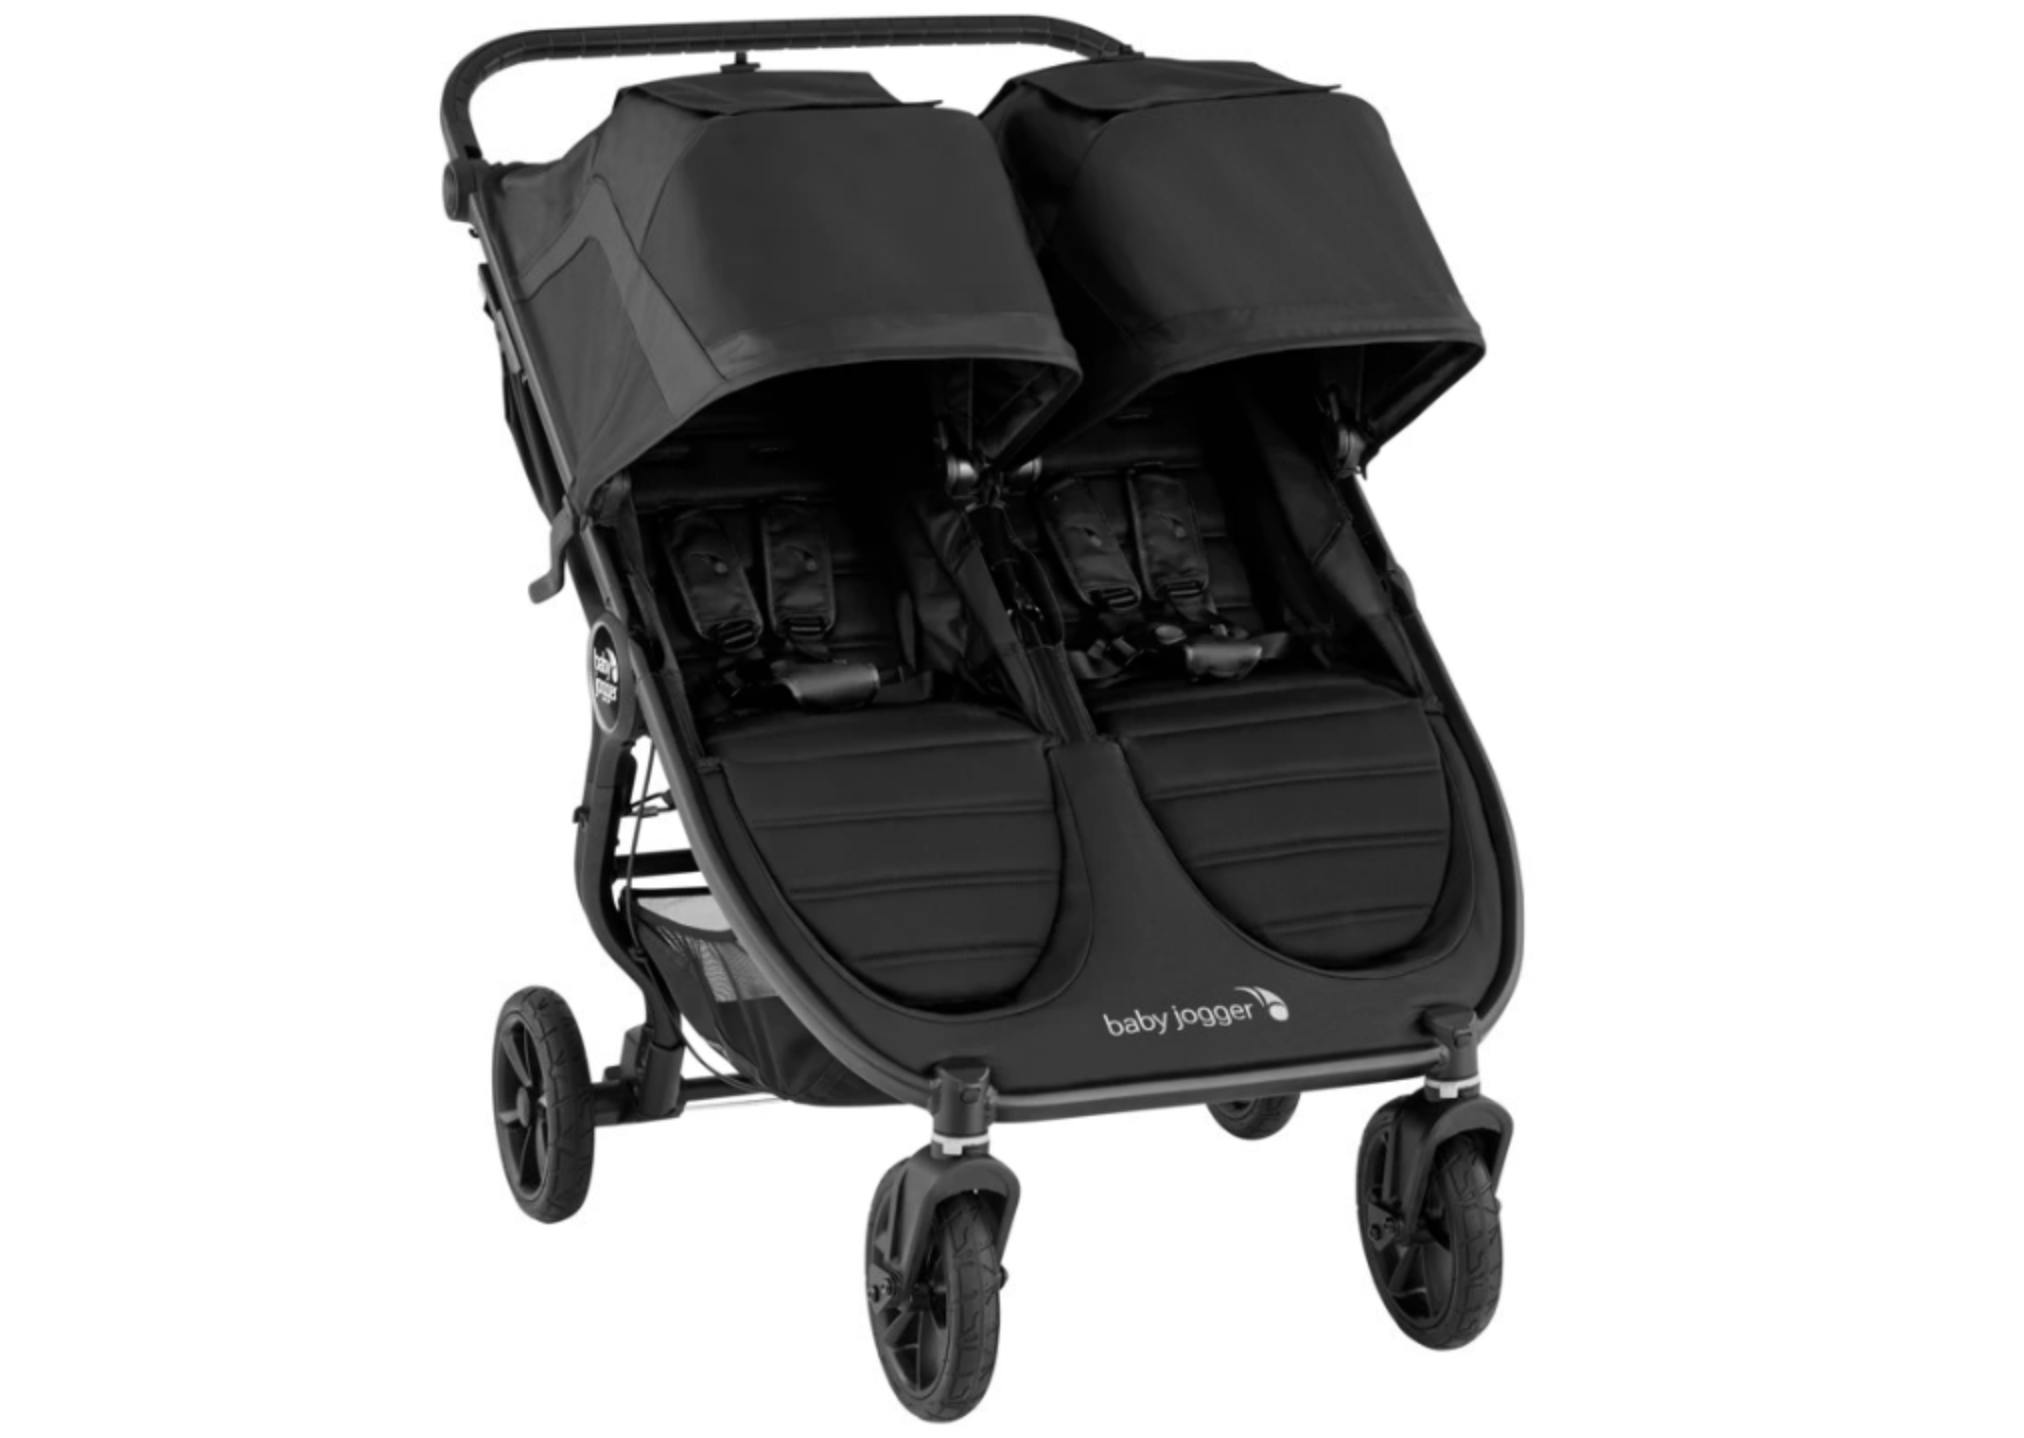 The Baby Jogger City Mini GT2 Double Stroller.